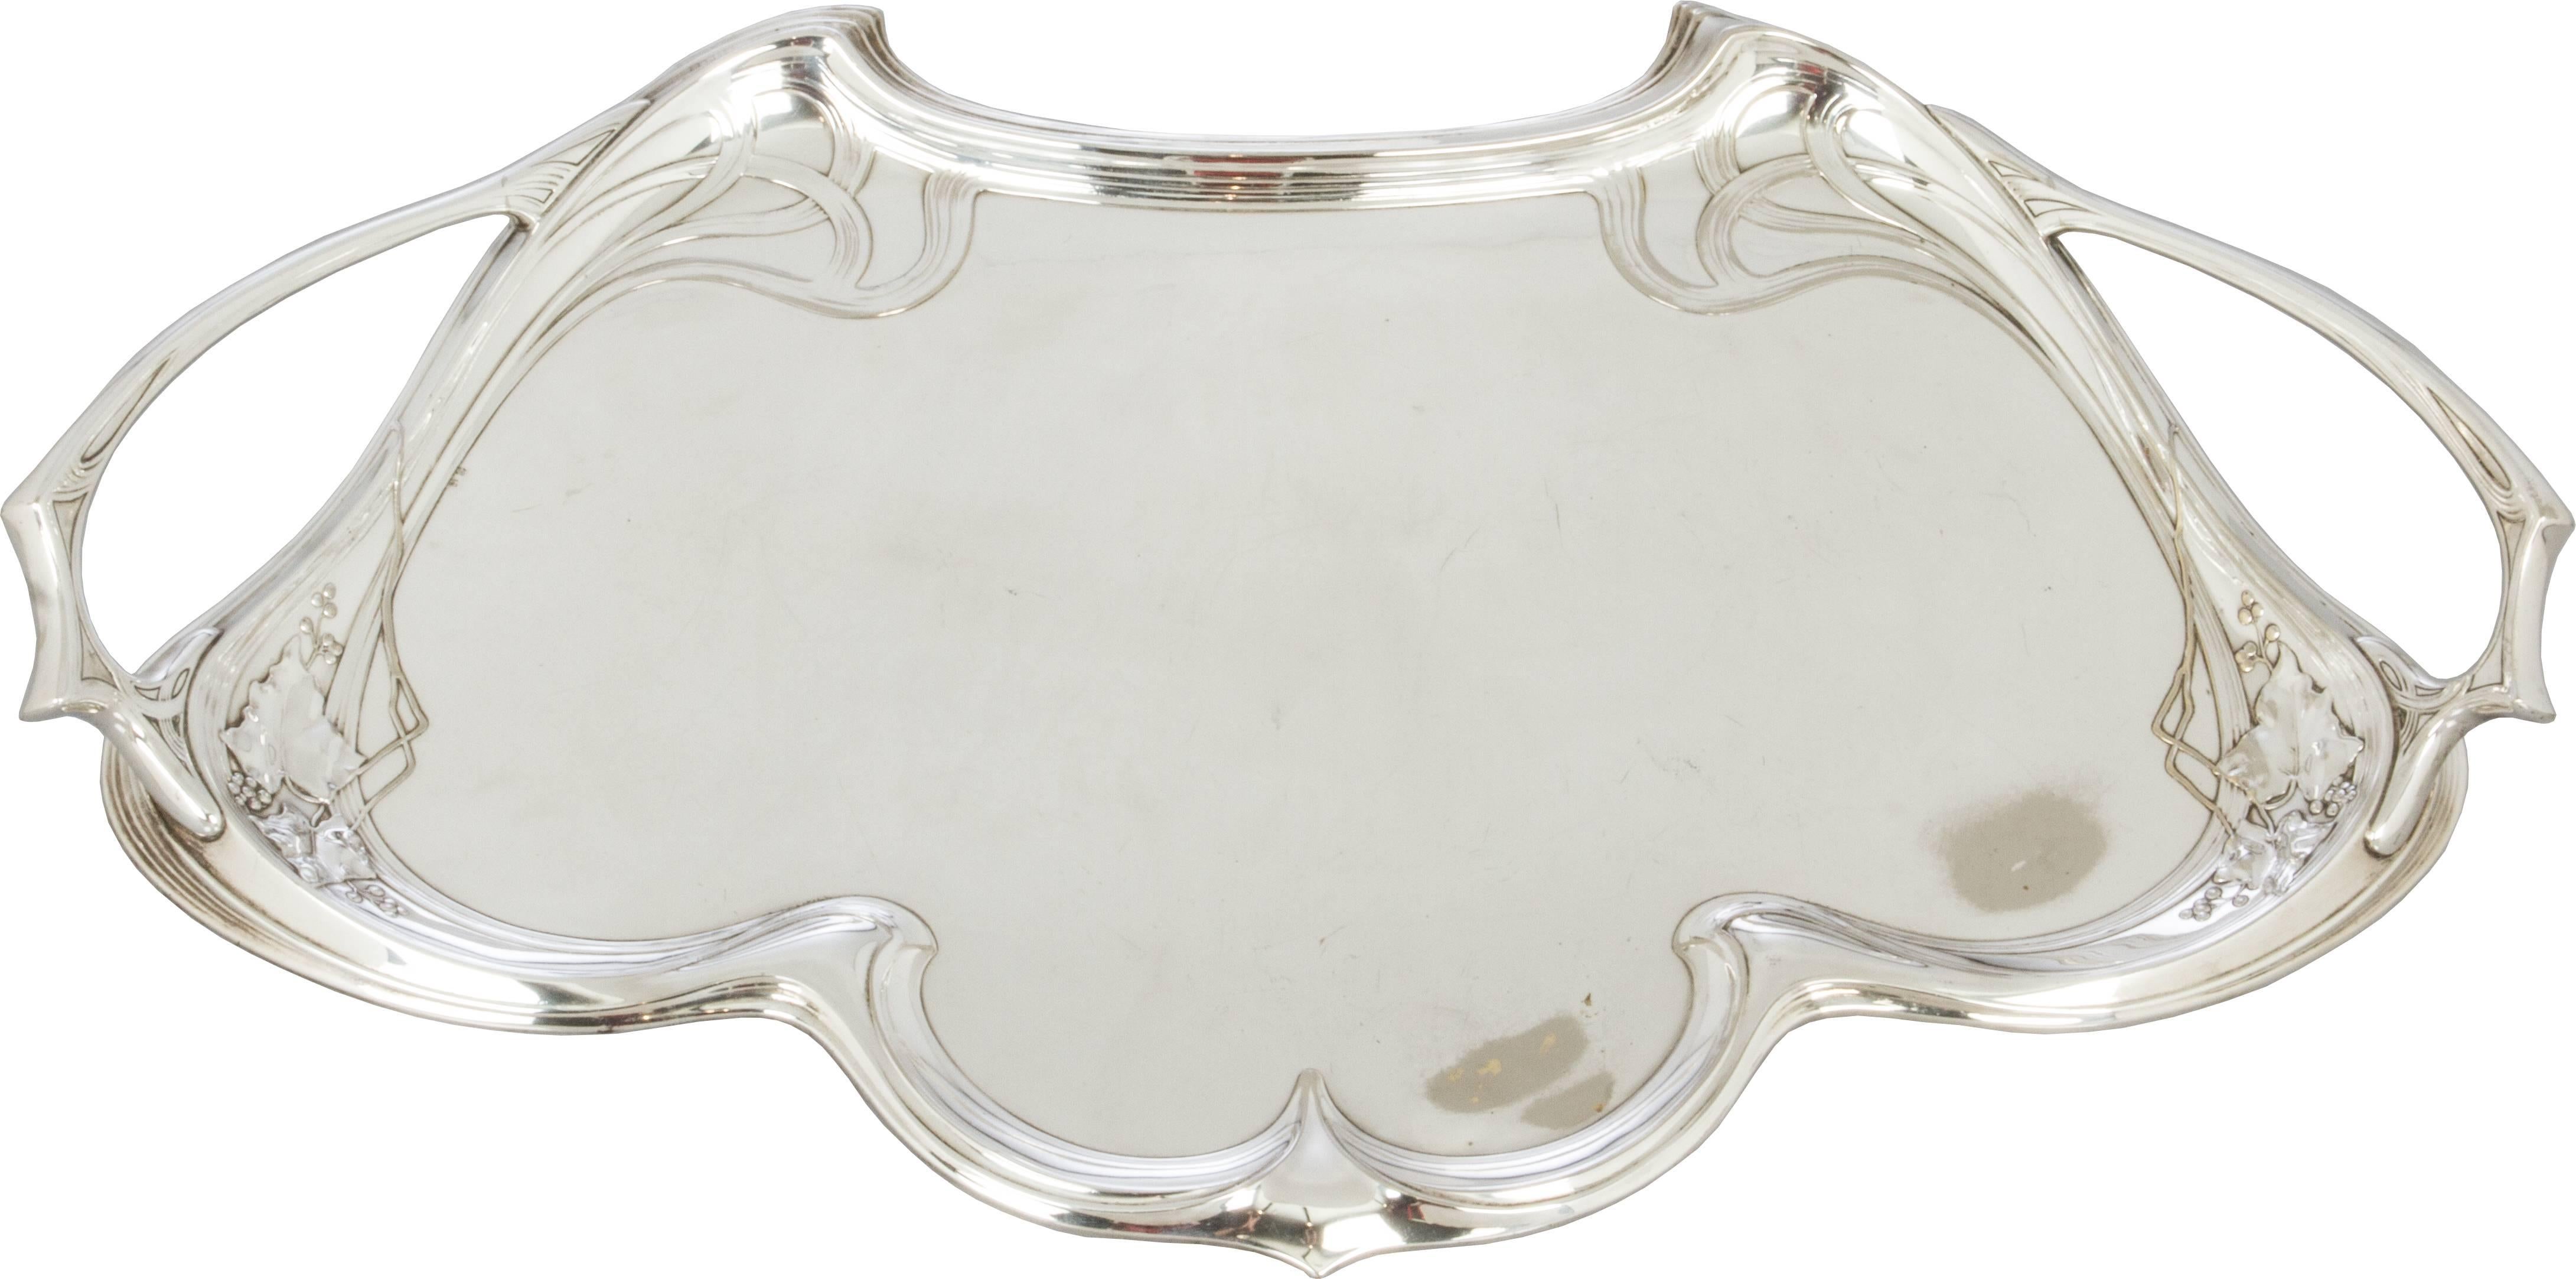 This is a beautiful large stylized handed tray with a floral motif. It is hallmarked with the ostrich, WMF and I/O.